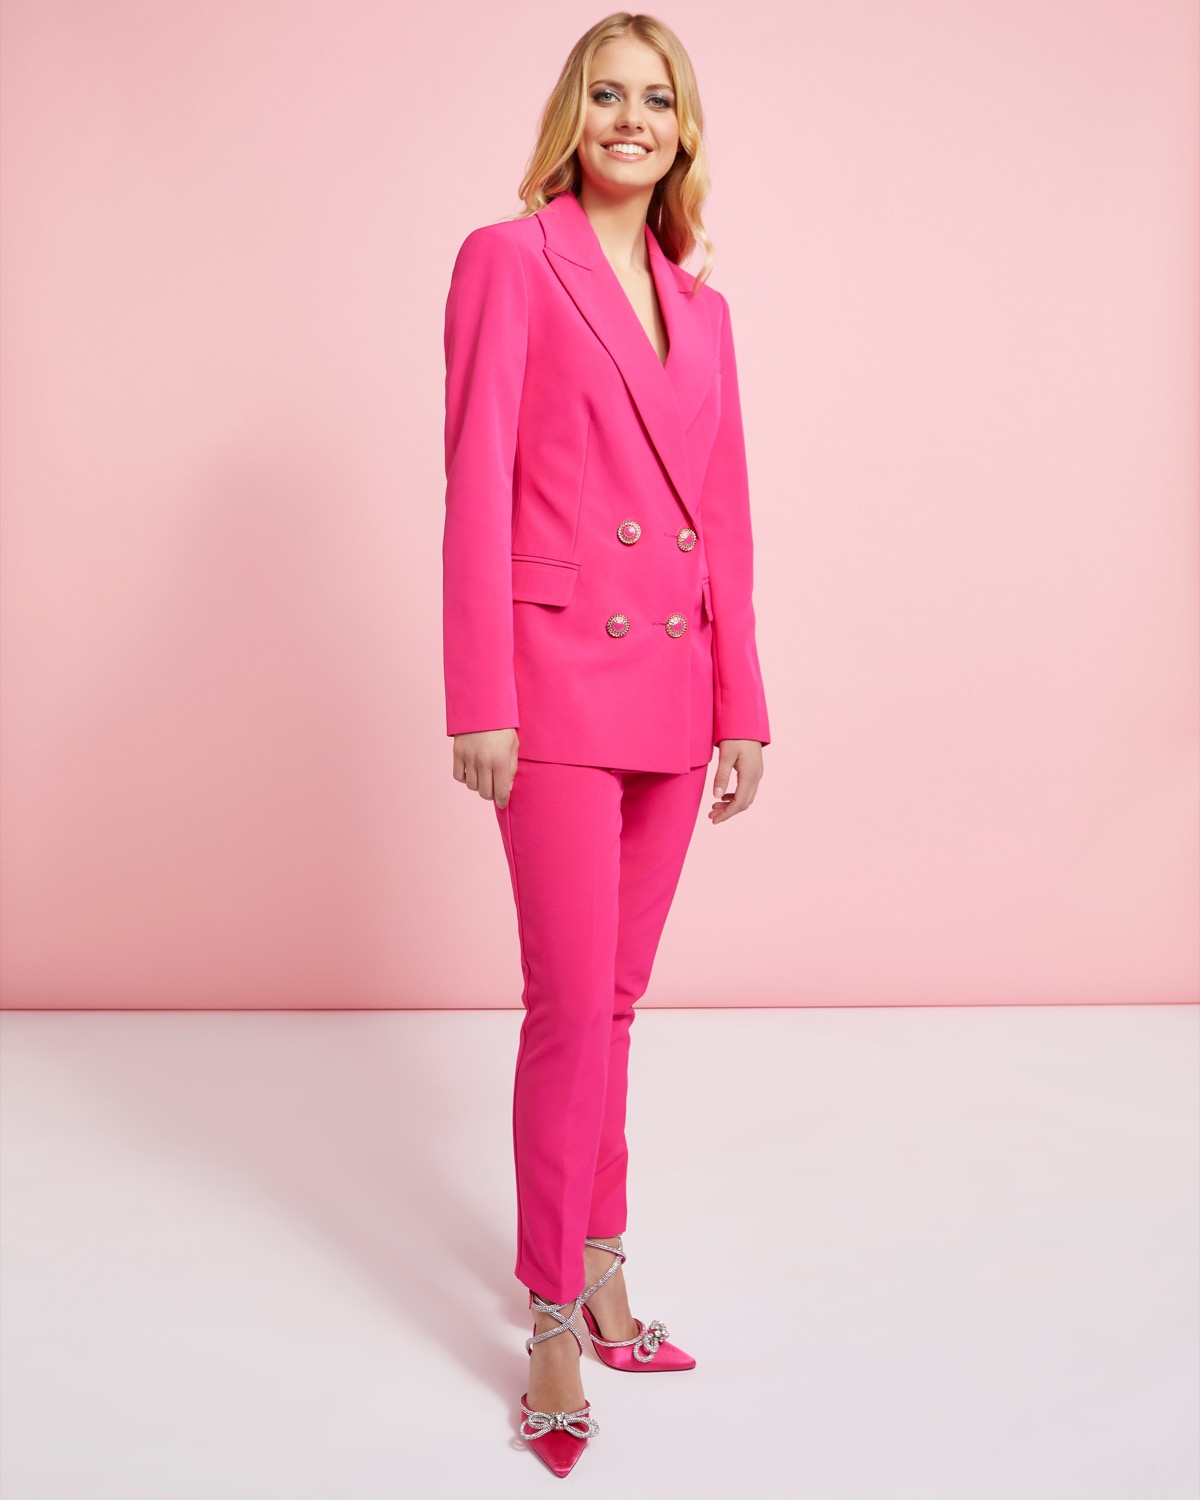 https://dunnes.btxmedia.com/pws/client/images/catalogue/products/7953990/zoom/7953990_bright-pink.jpg